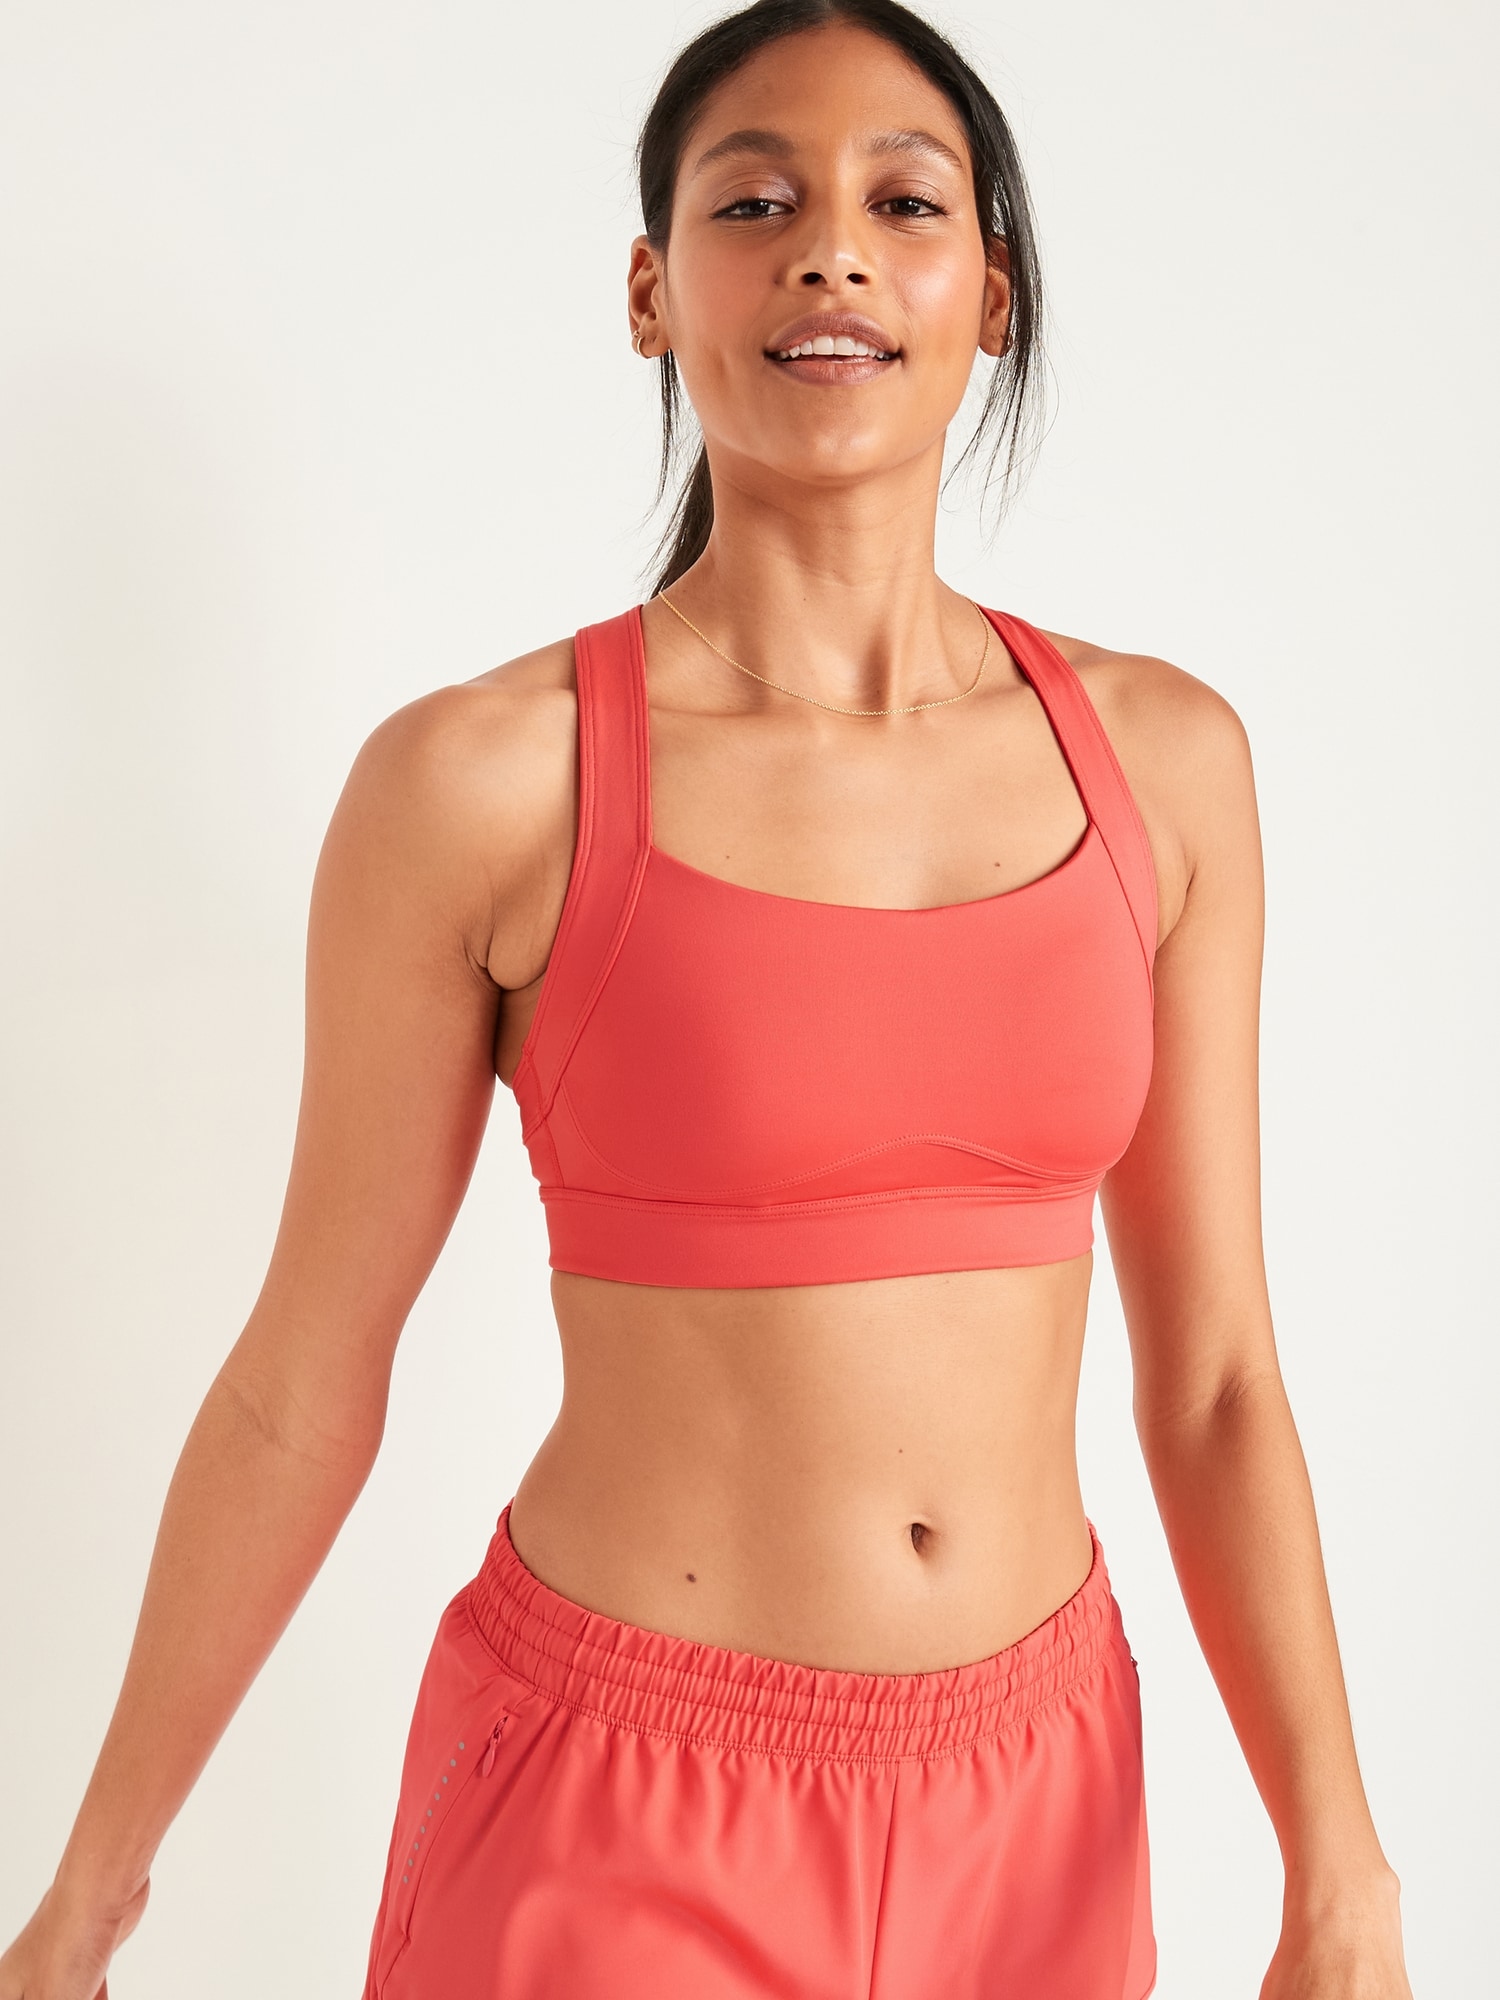 High Support Cross-Back Sports Bra for Women XS-XXL, Old Navy